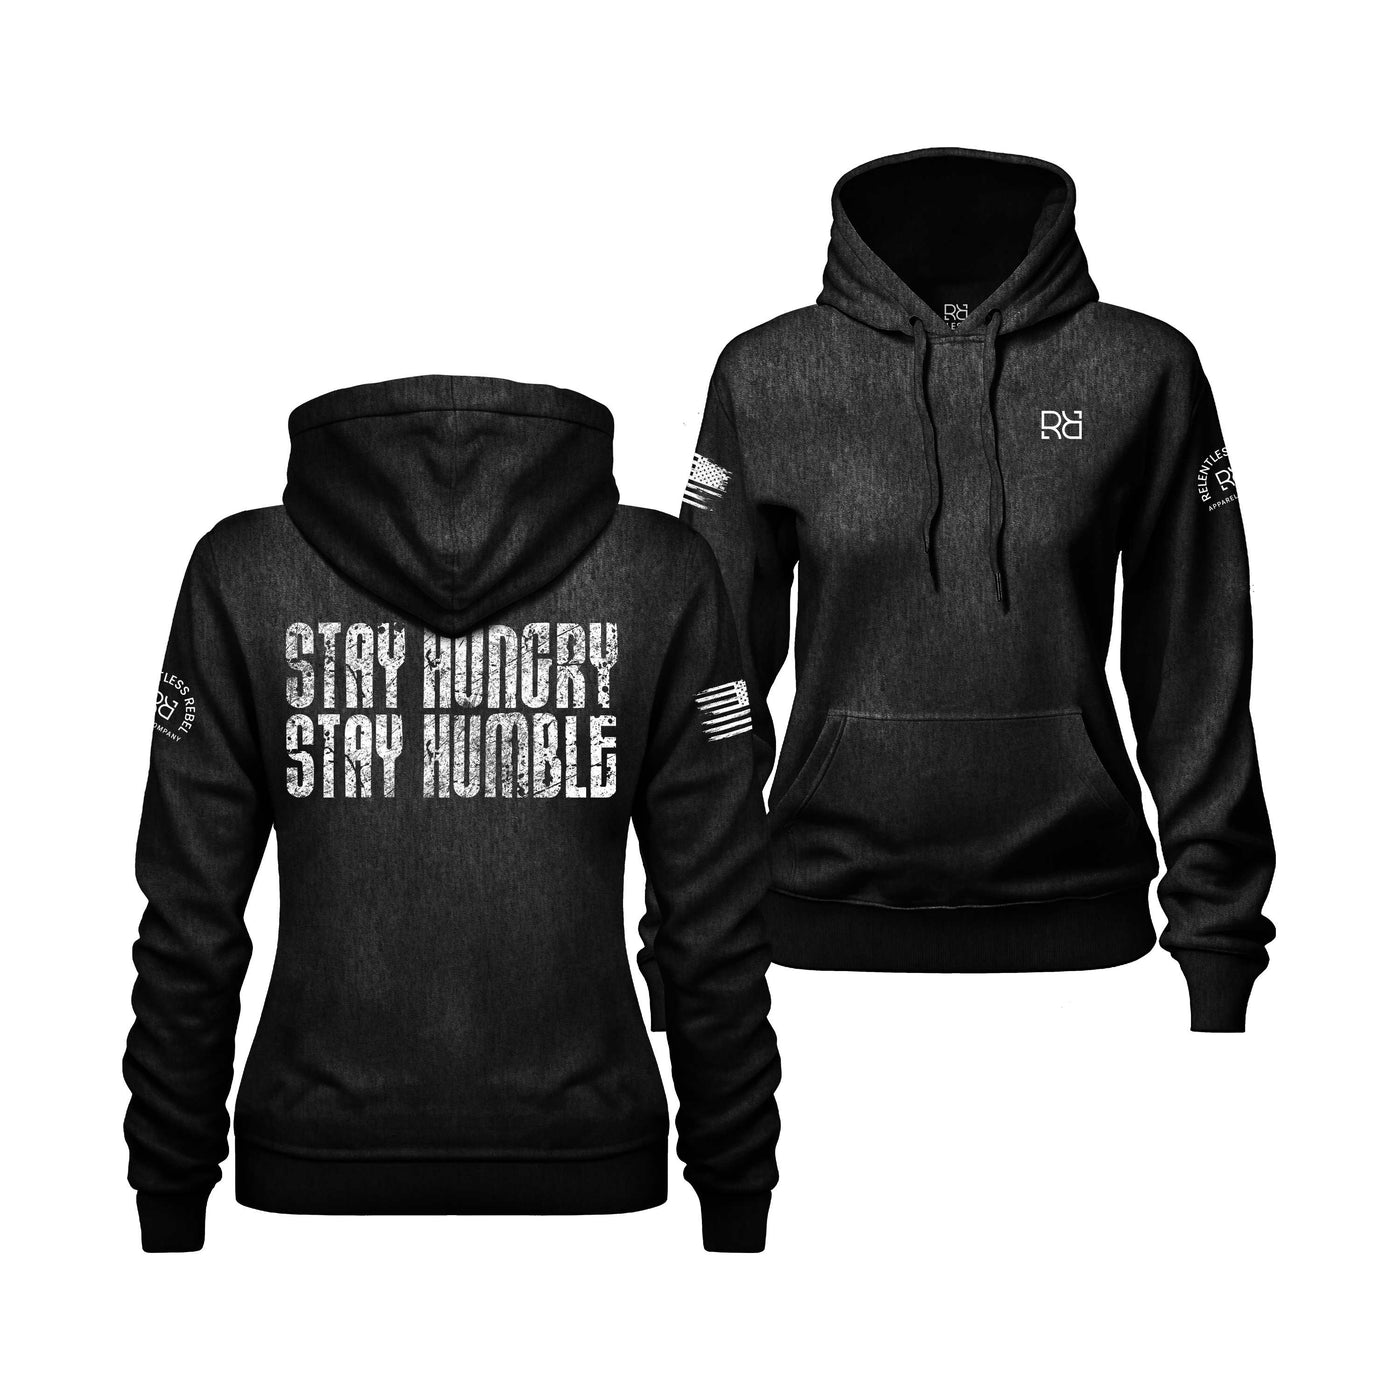 Stay Hungry Stay Humble | Women's Hoodie